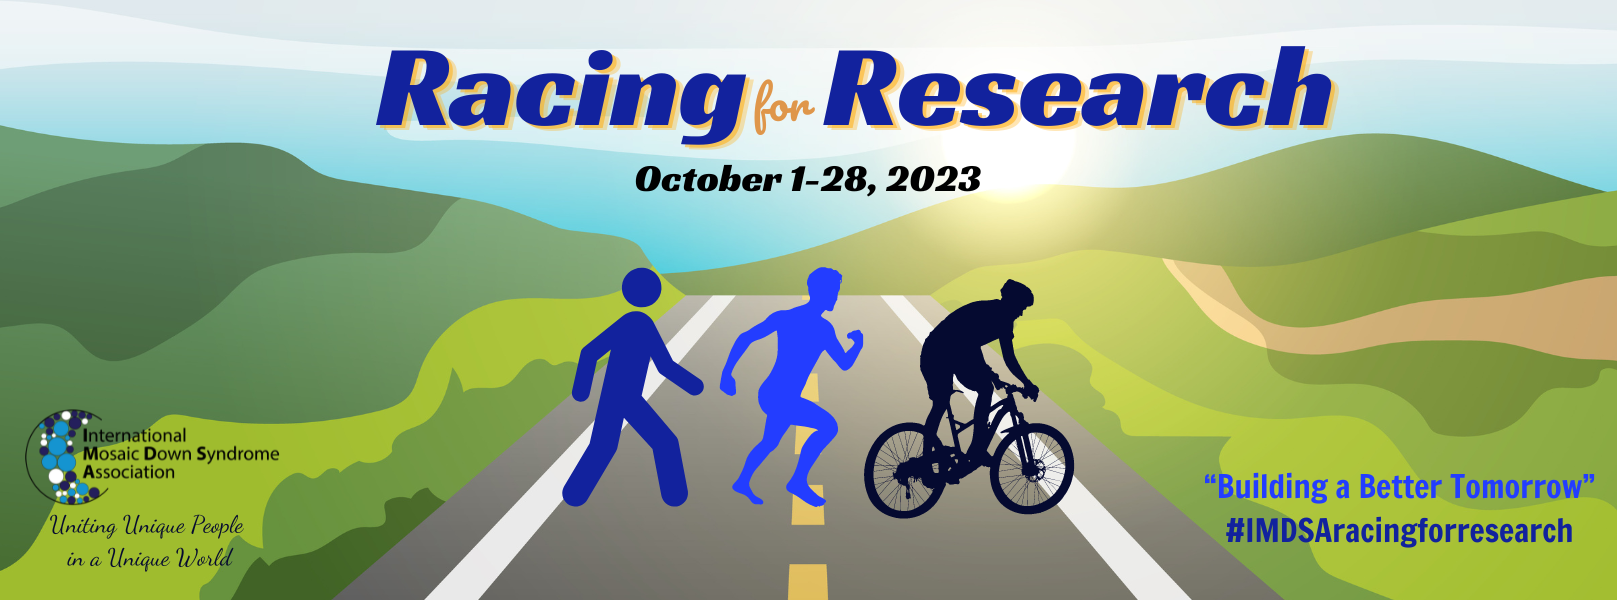 Racing for Research 2023